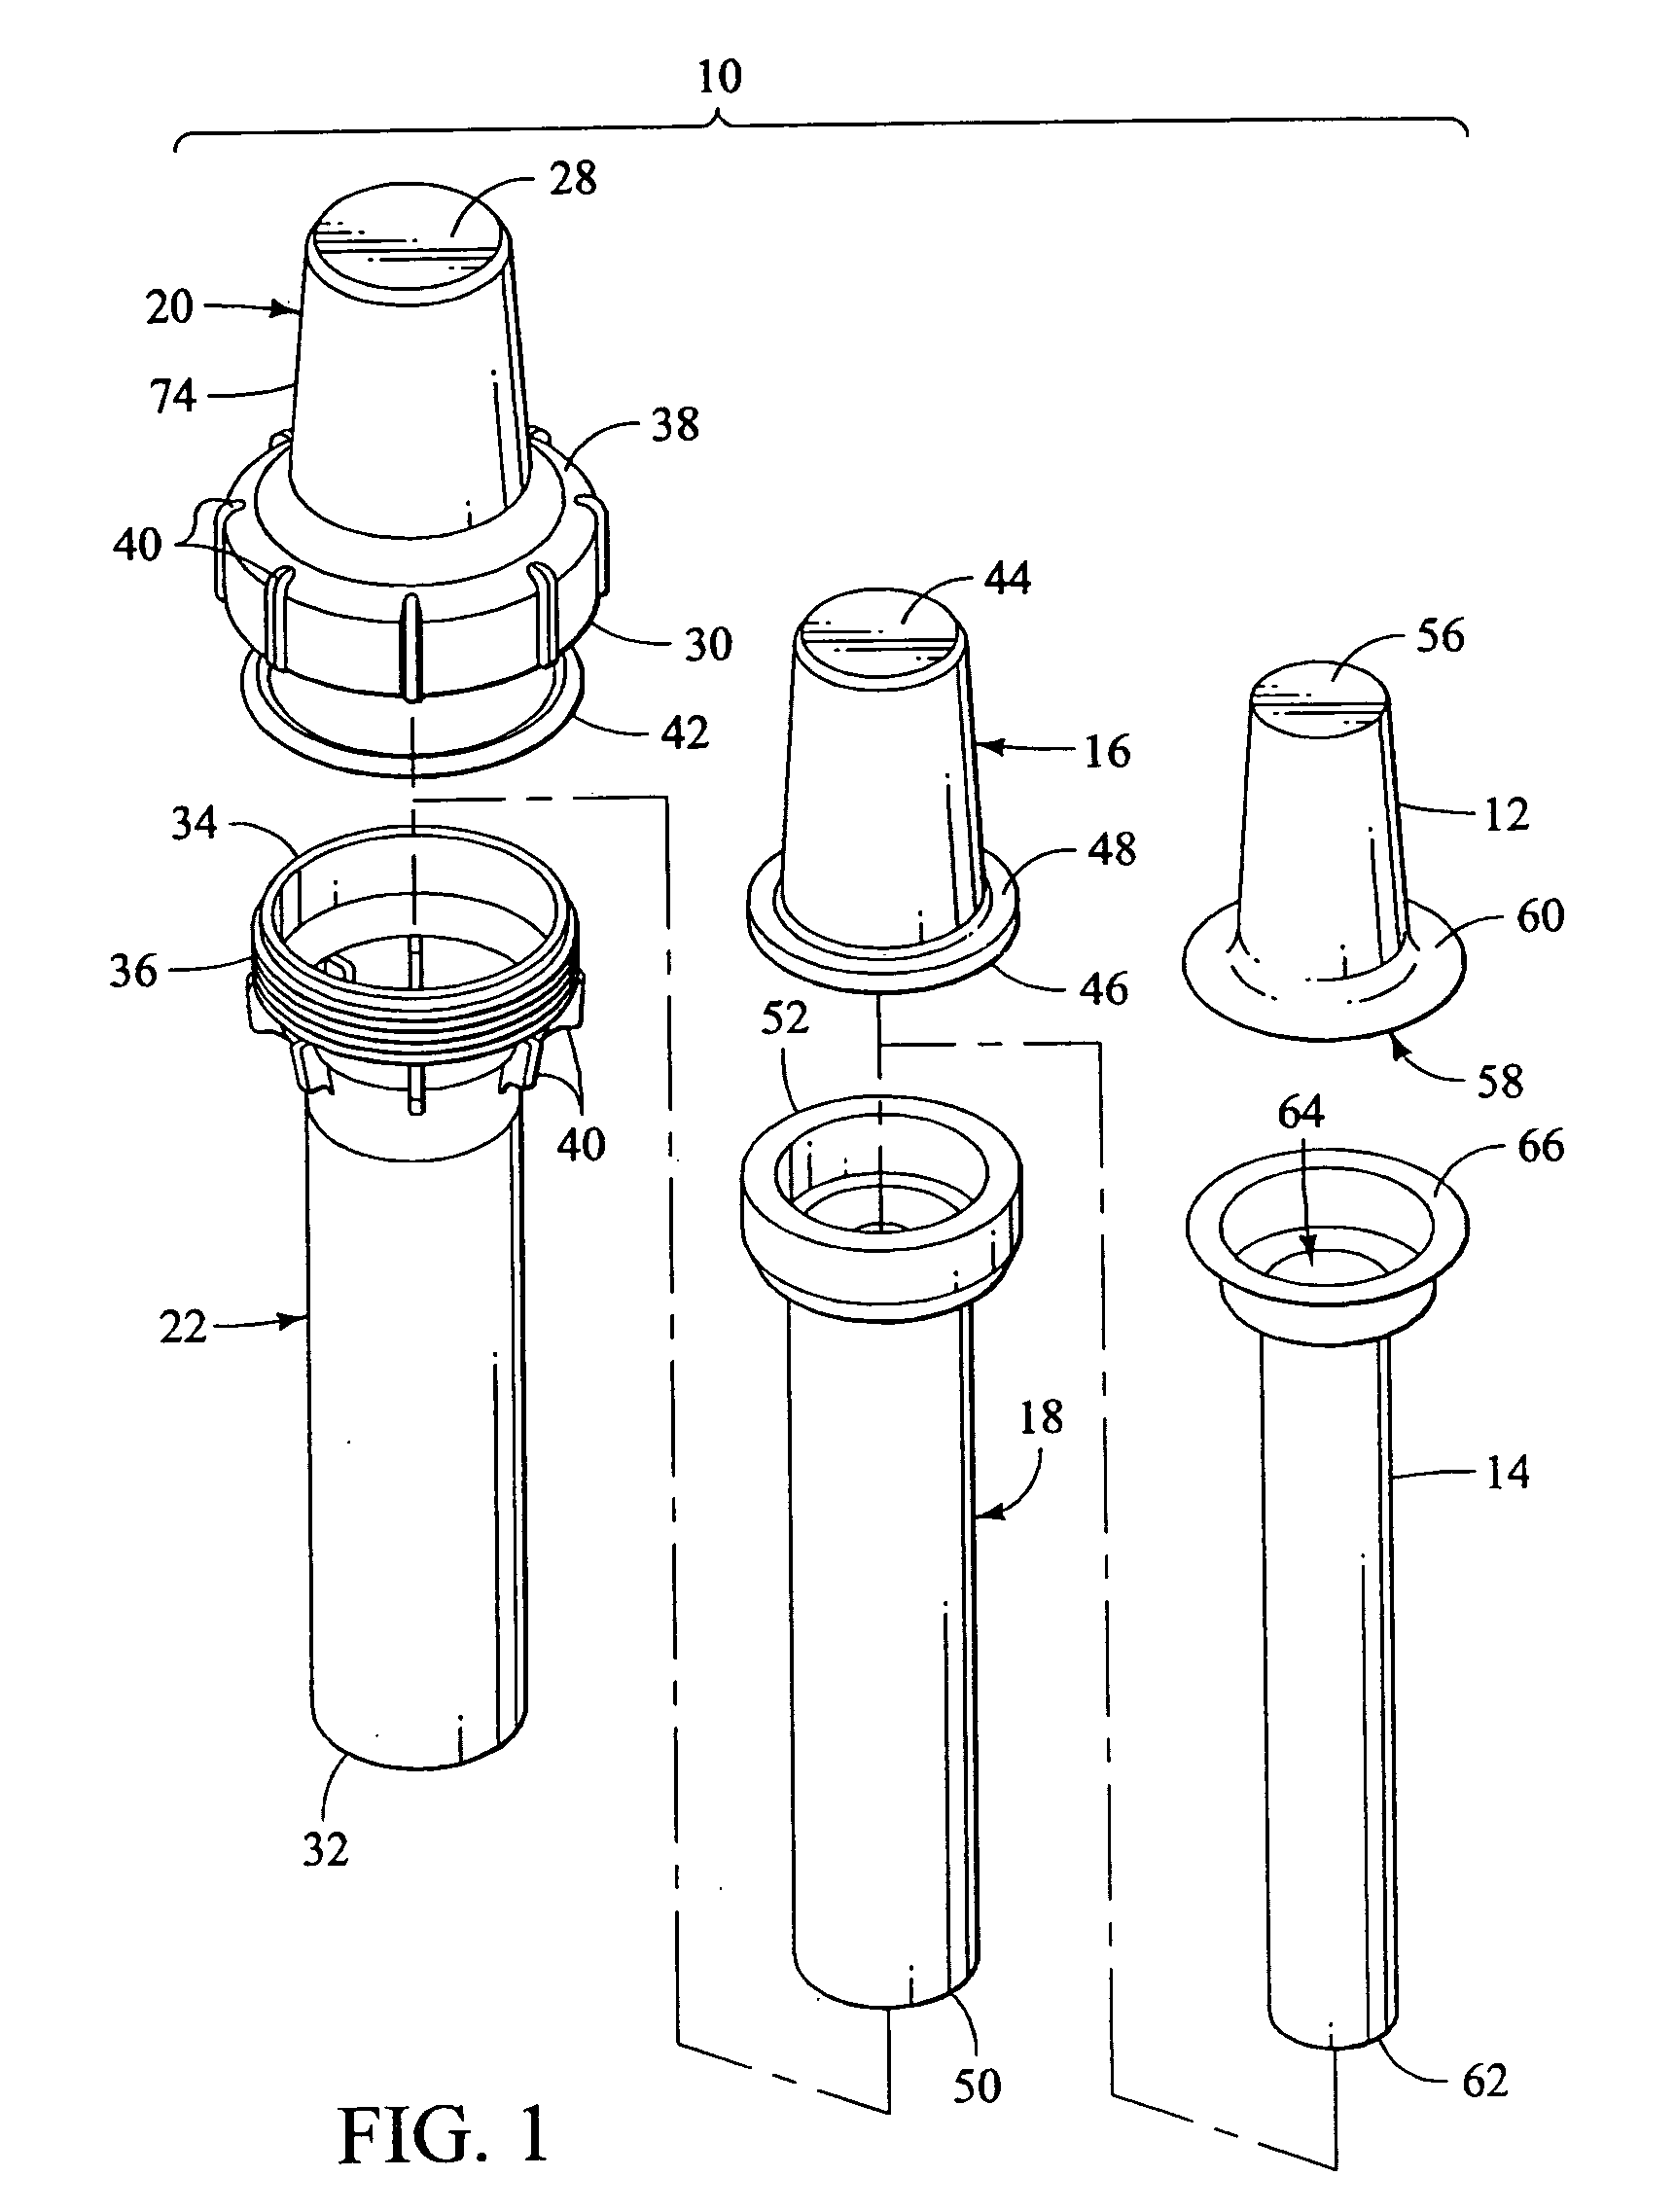 Apparatus and method for transporting radiopharmaceuticals